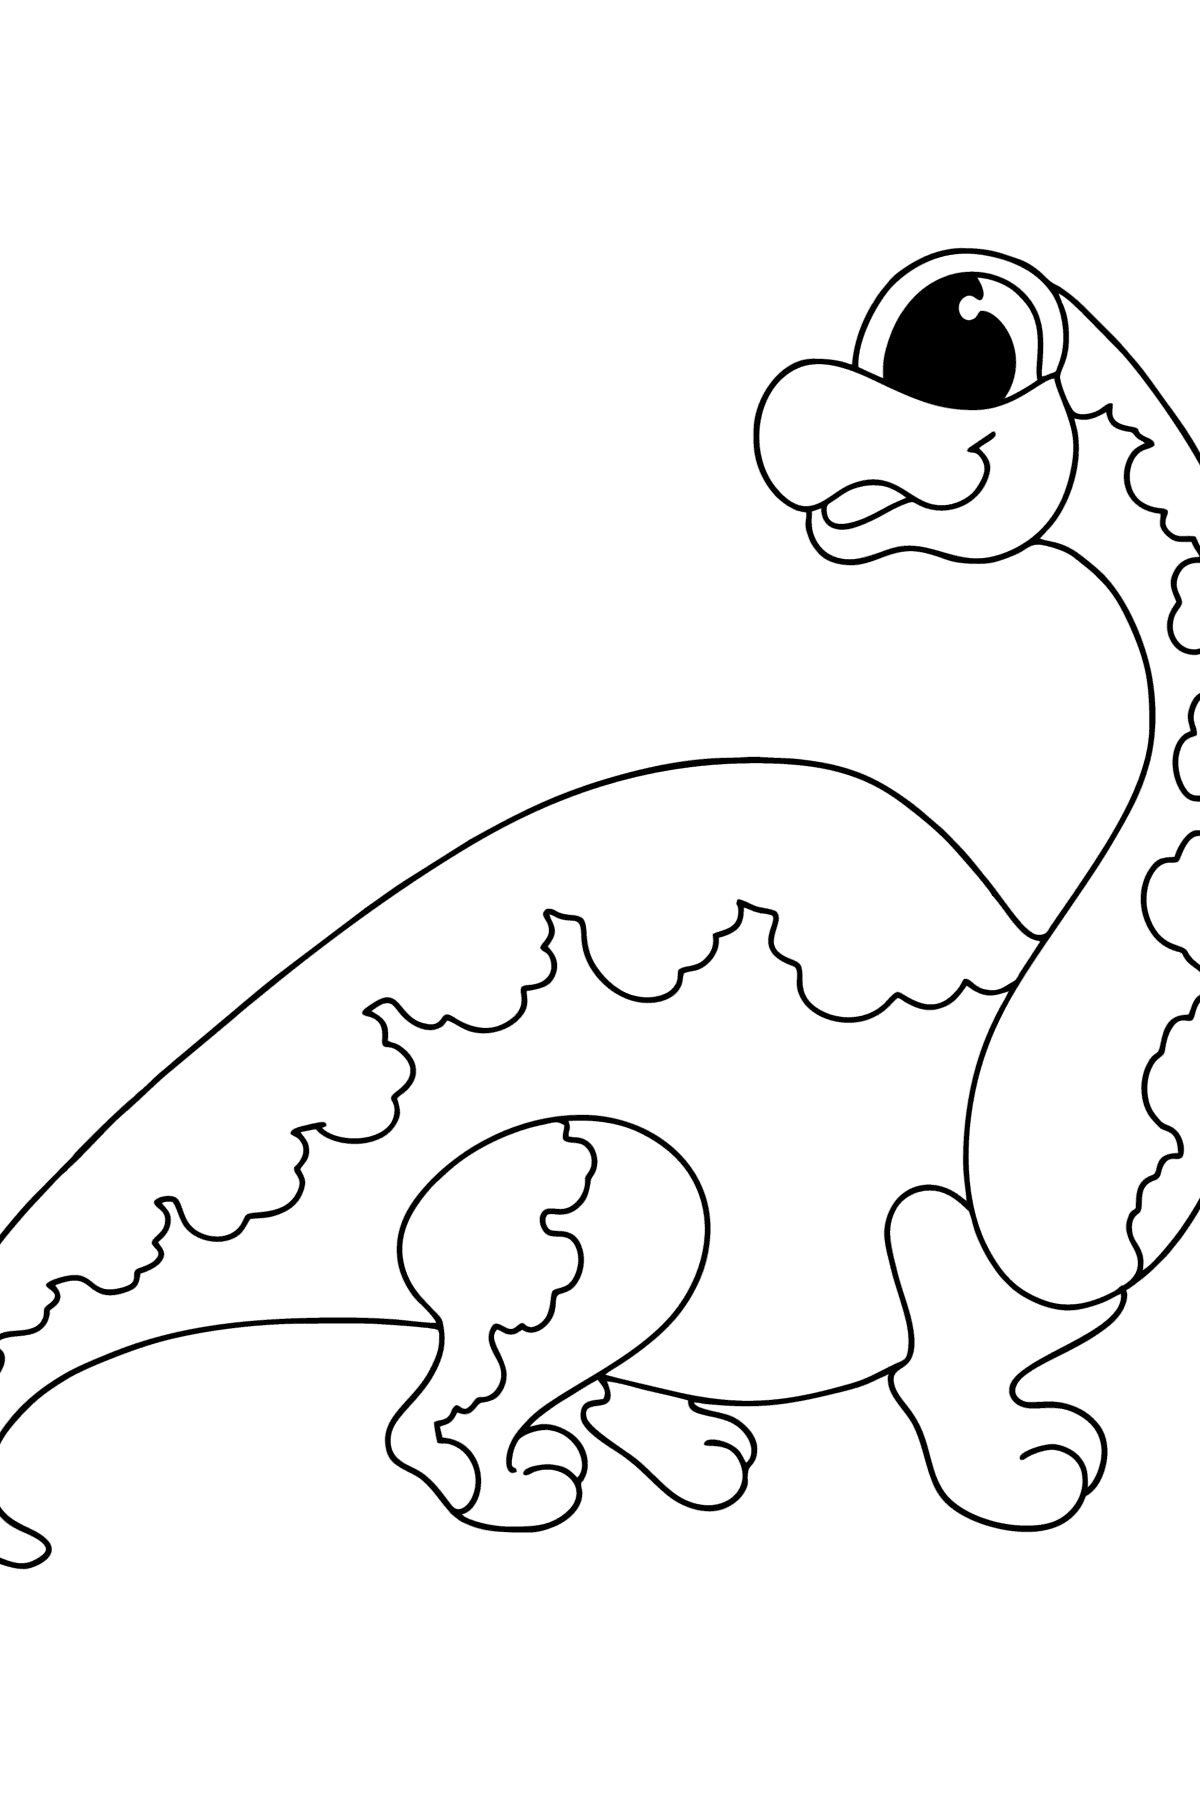 Brachiosaurus coloring page - Coloring Pages for Kids